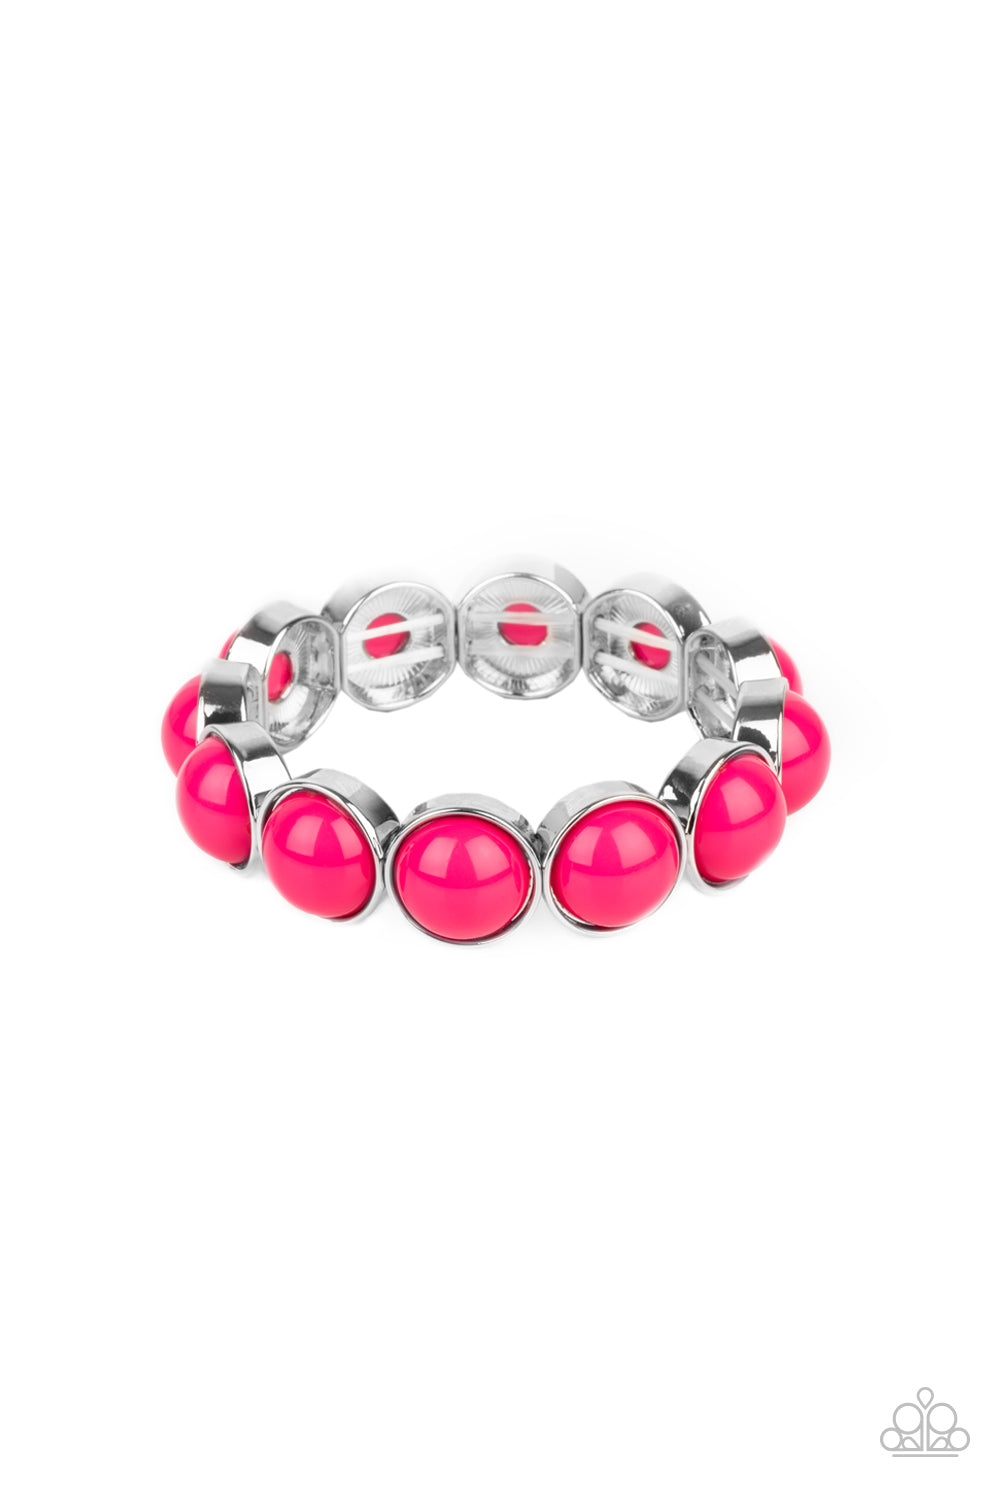 Featuring flamboyant pink beaded centers, bubbly silver frames are threaded along stretchy bands around the wrist for a powerful pop of color.